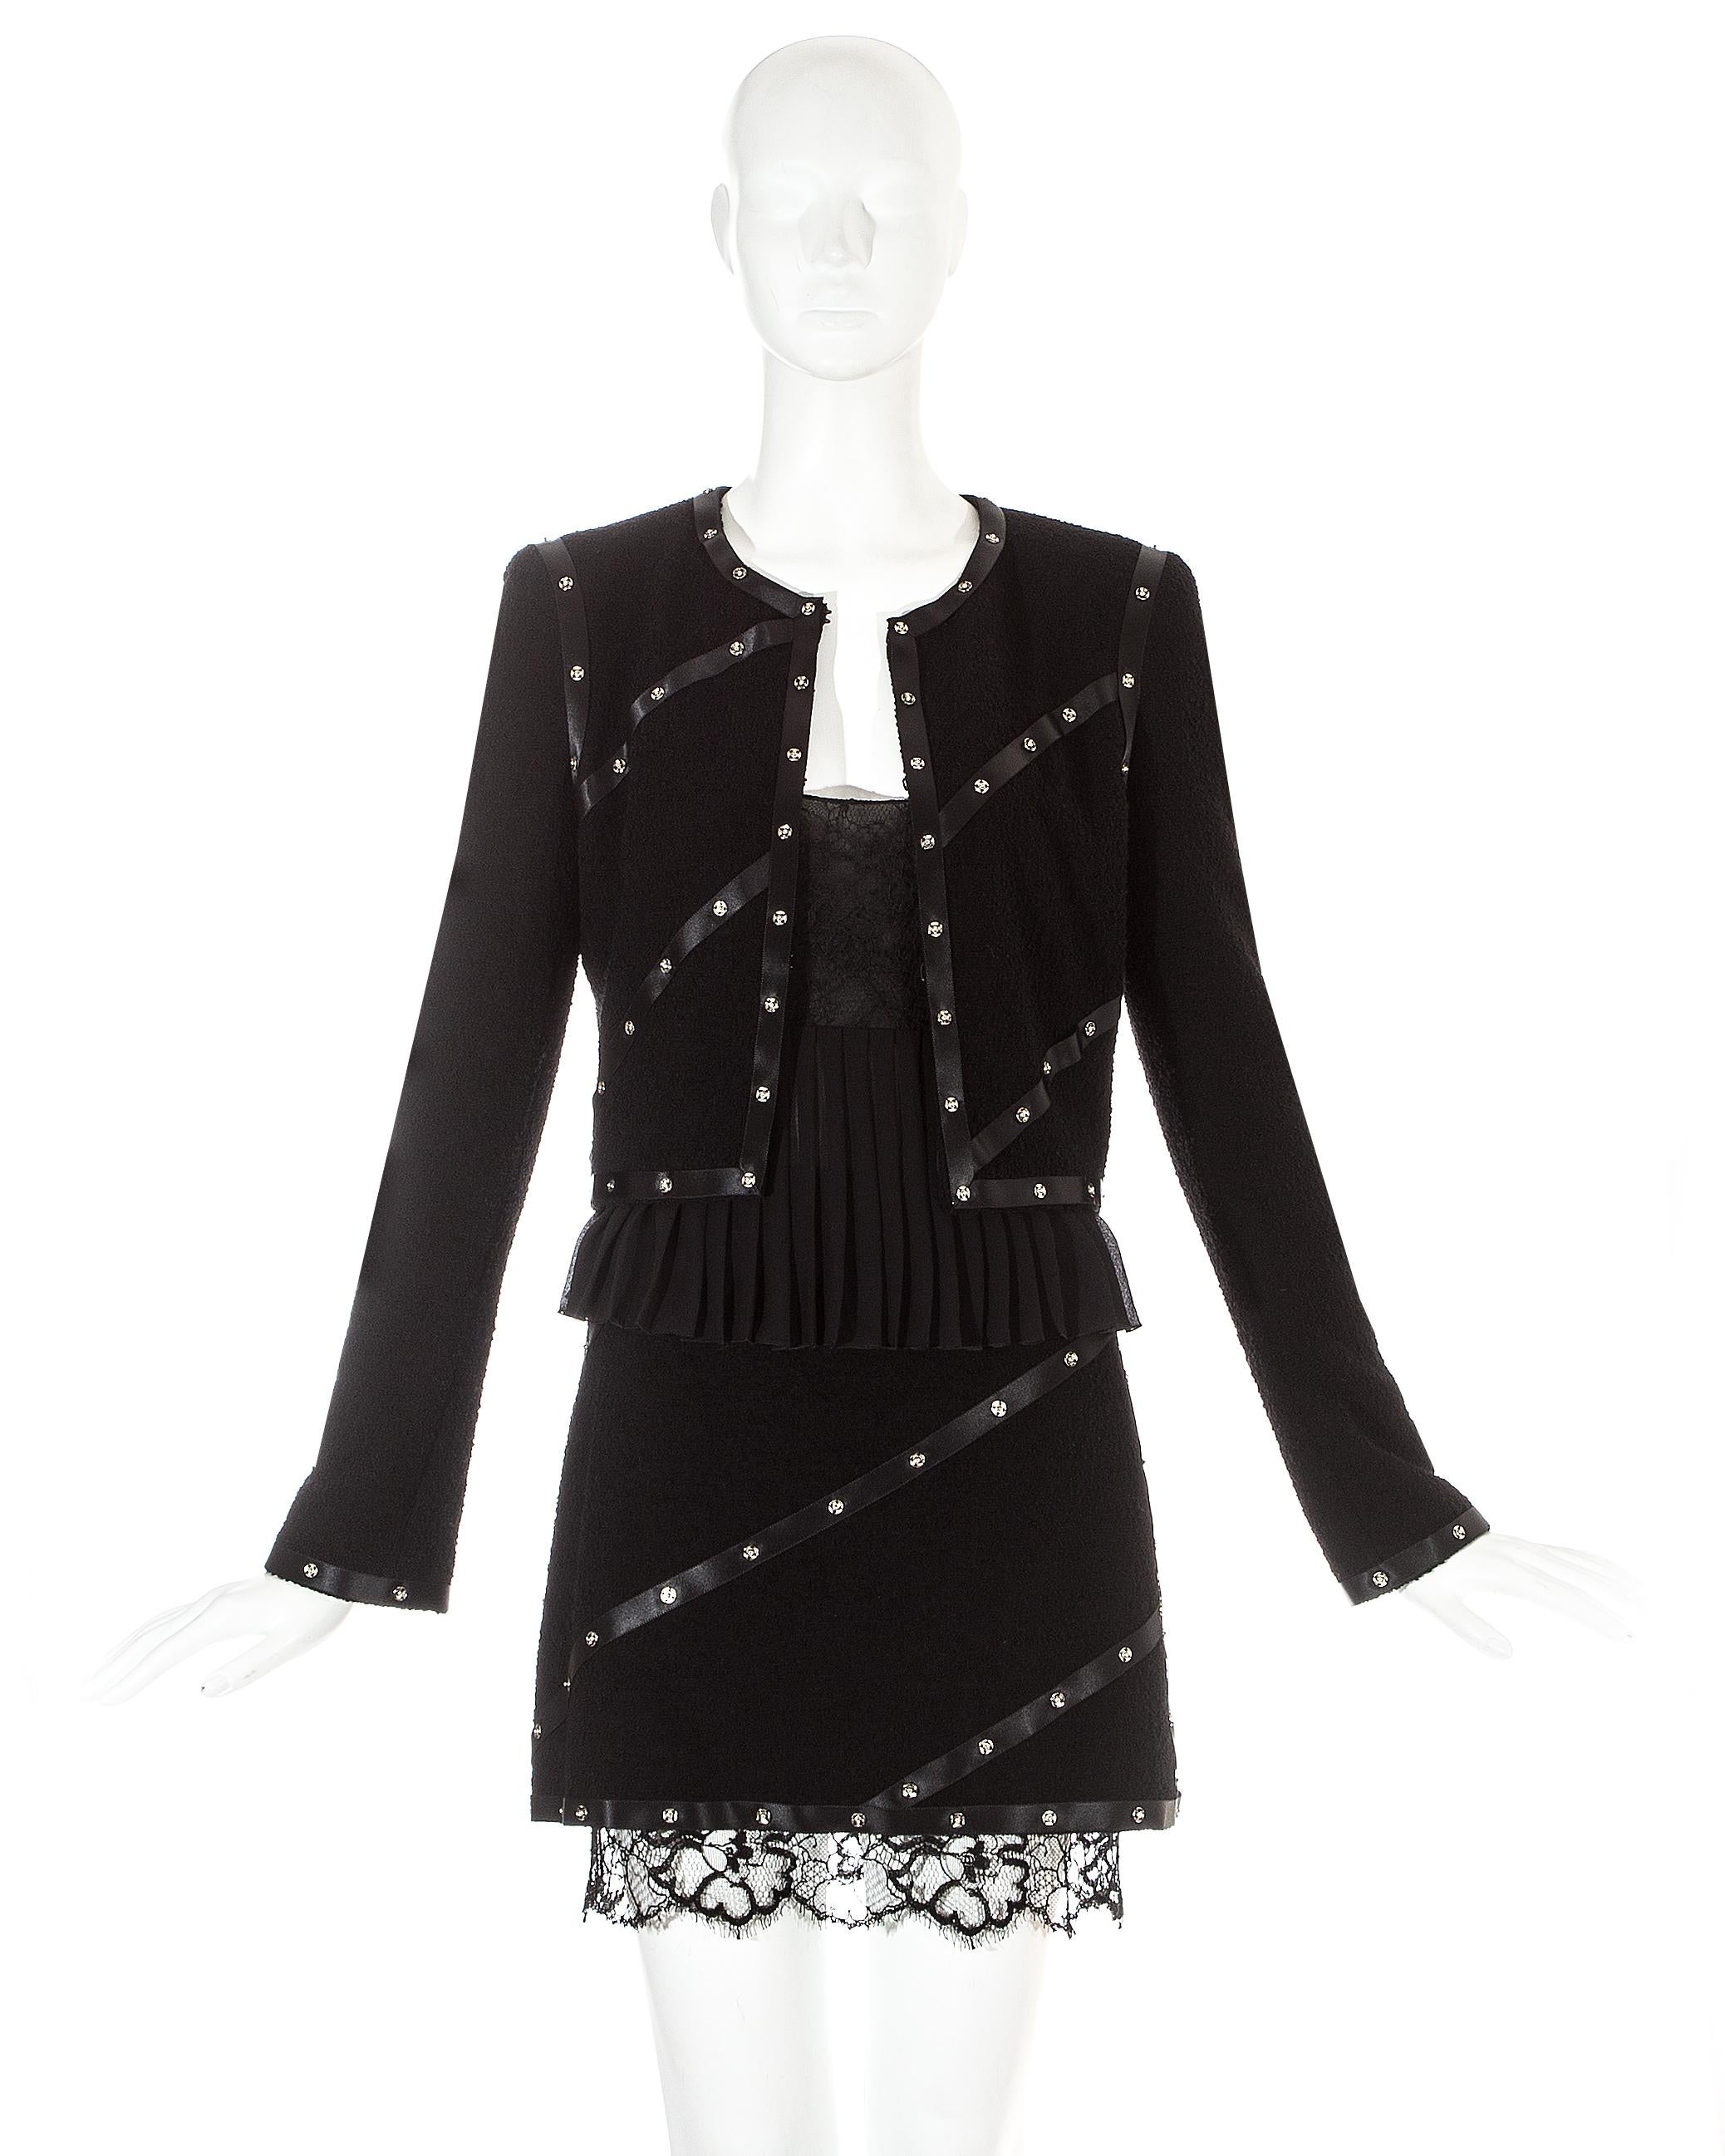 Chanel by Karl Lagerfeld, 3 piece skirt suit. Long sleeve fitted jacket with silk ribbon bands and metal press studs. Matching mini skirt with lace hem. Silk chiffon pleated cropped vest with lace bra.

Fall-Winter 2003